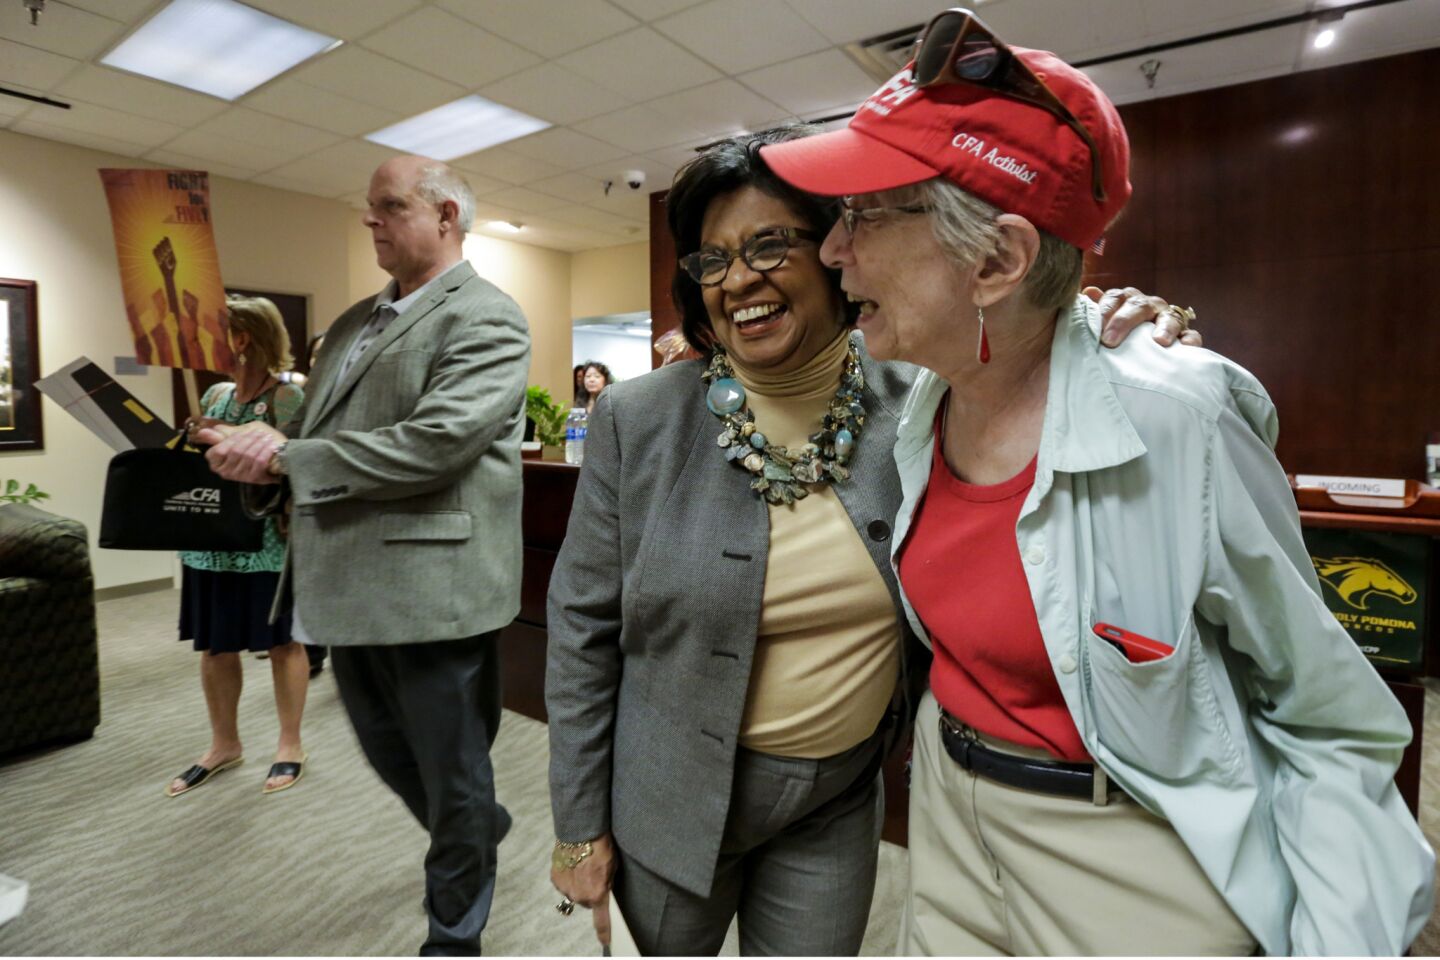 Cal Poly Pomona President Soraya Coley, left, hugs retired mathematics professor Harriet Lord, who marched with other faculty to Coley's office Tuesday.